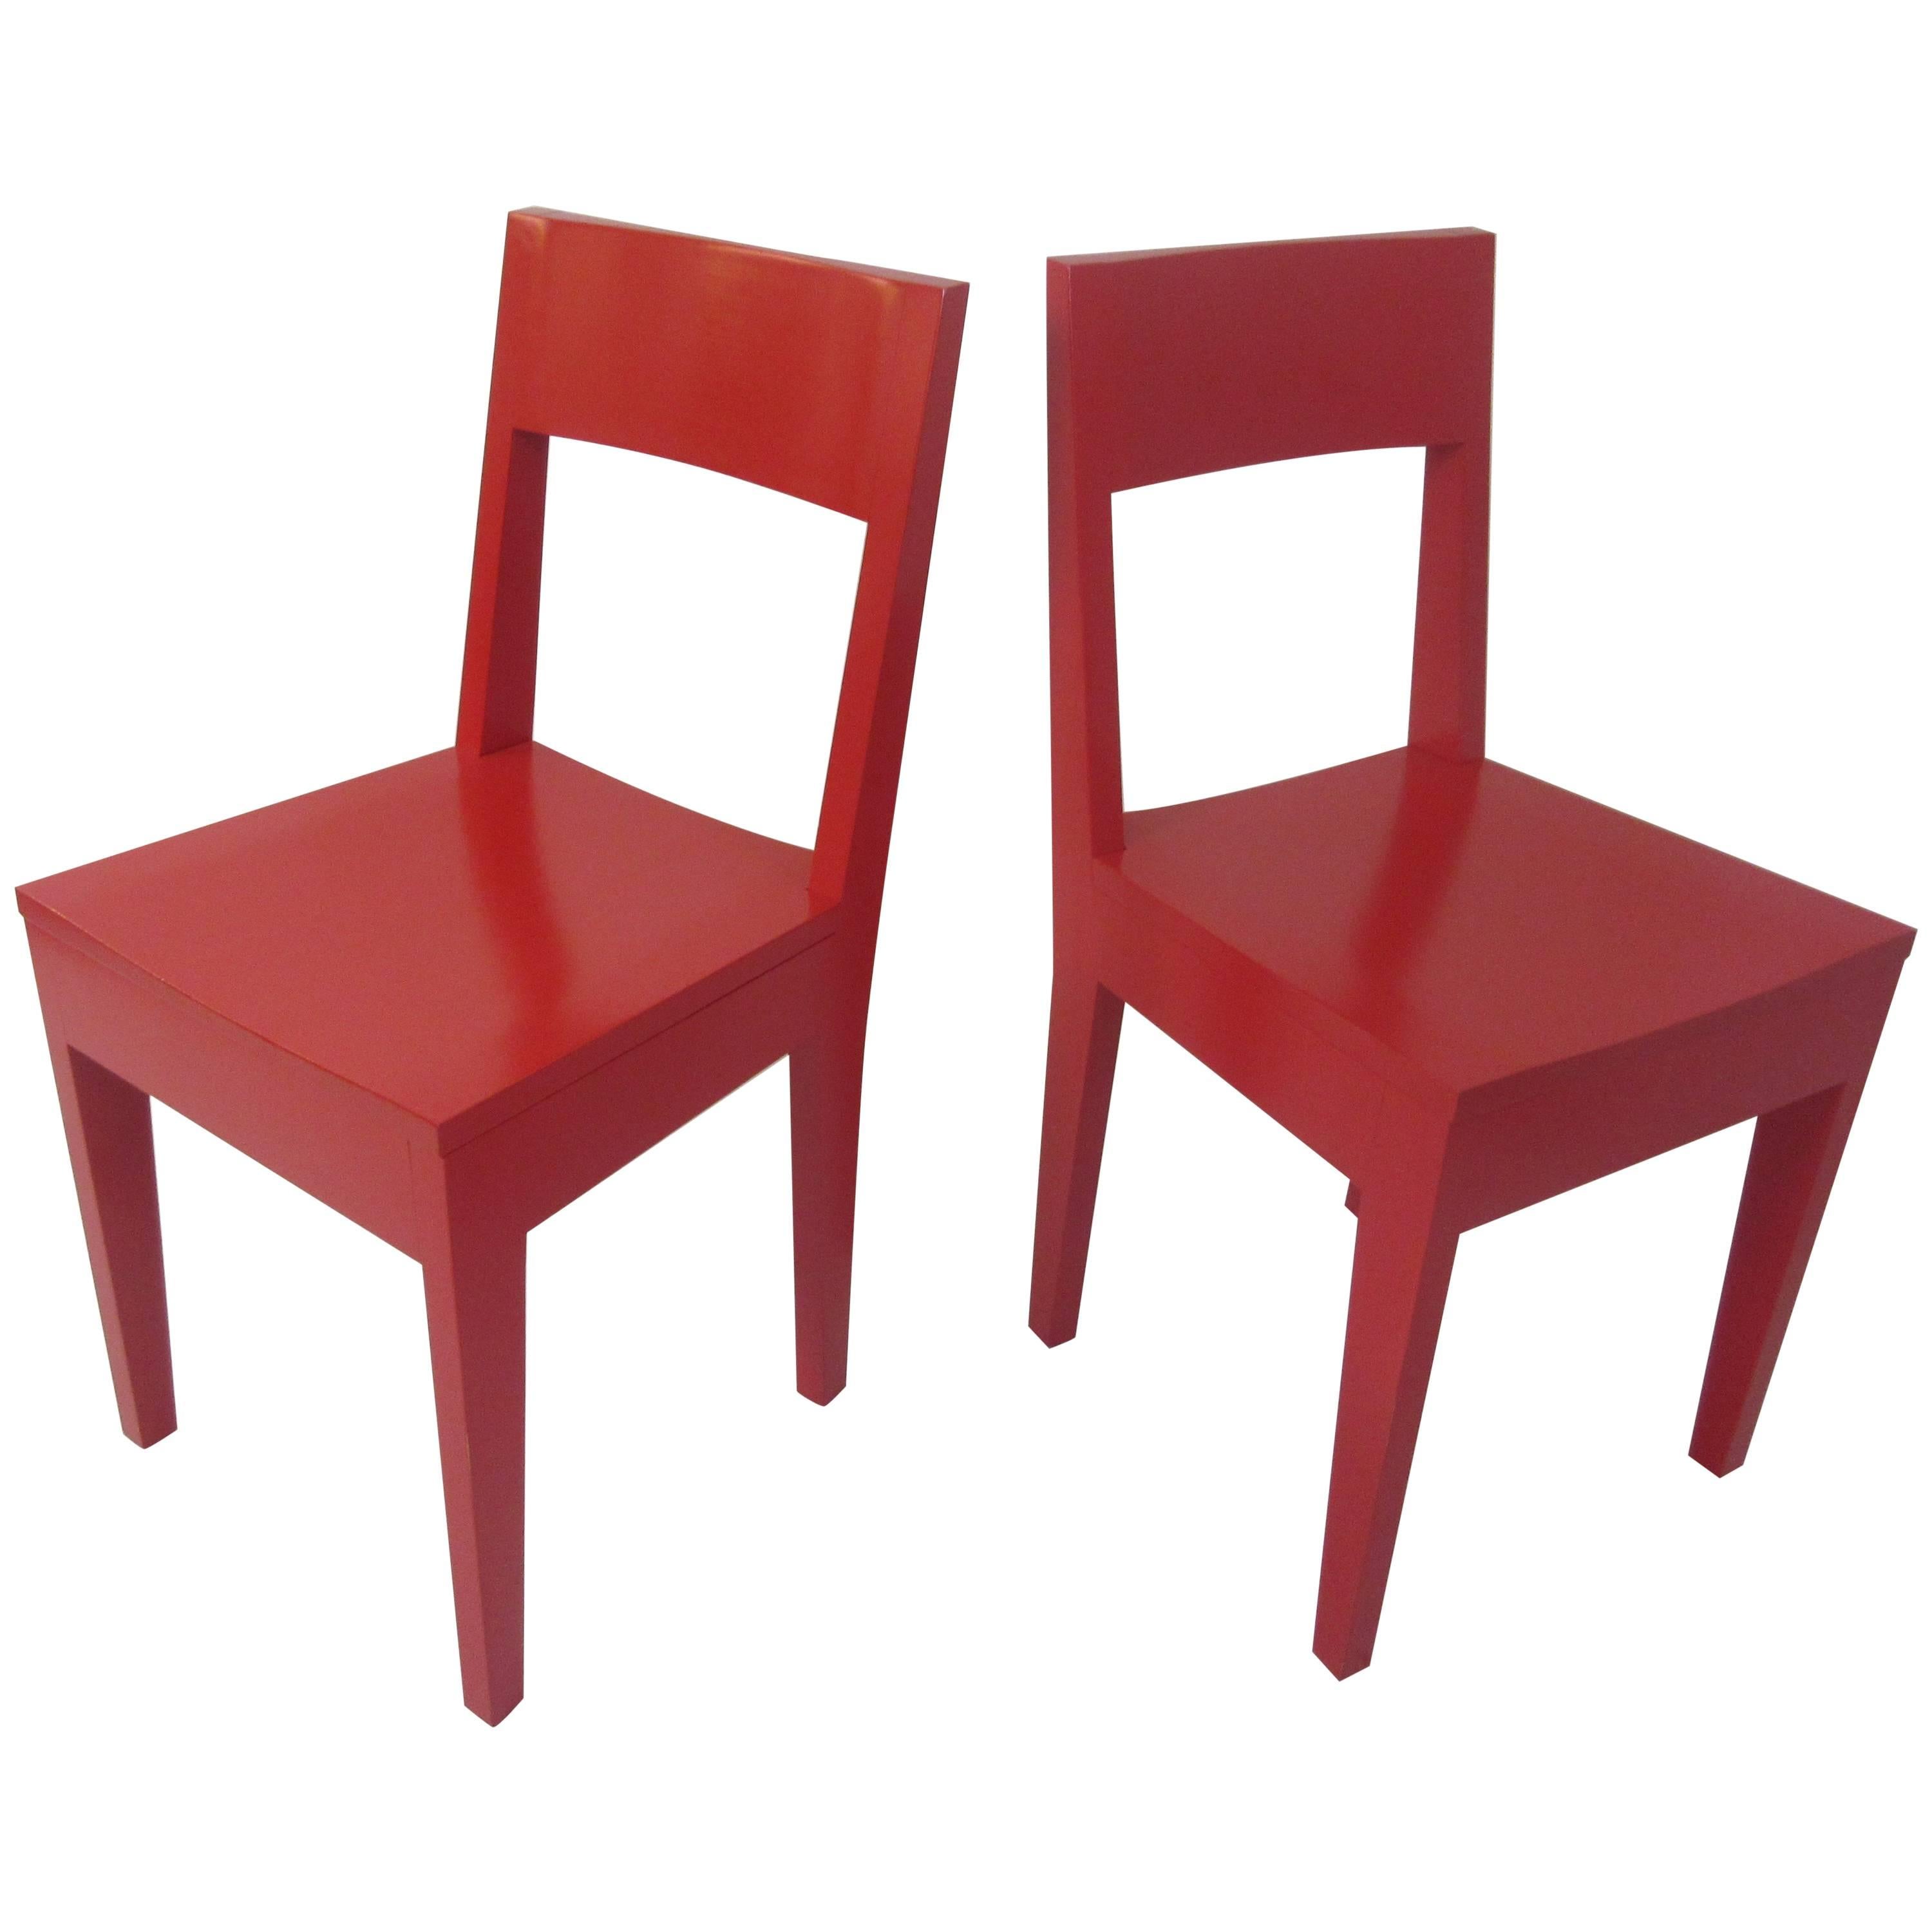 Pair of Red Wood Chairs